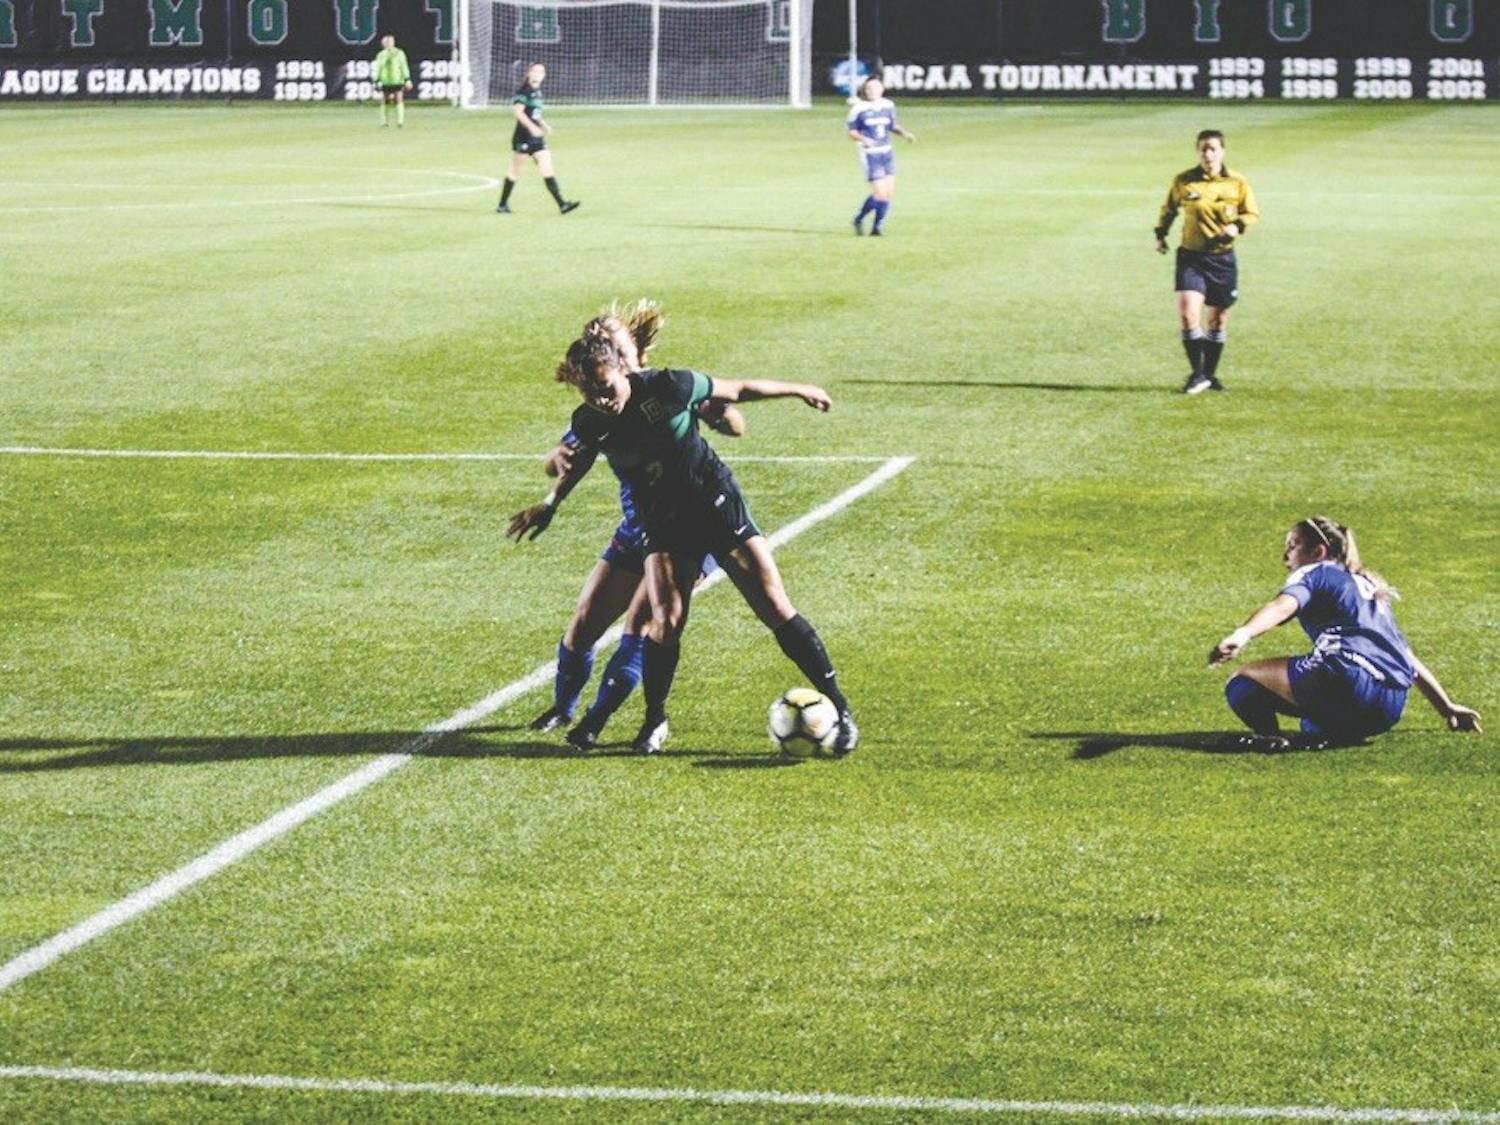 Led by a career high 10 saves by goalie Mariel Gordon ’21 and a strong defensive effort, the Big Green came away with a scoreless draw against Princeton University and go 5-3-2 overall adn 1-0-1 in league play.